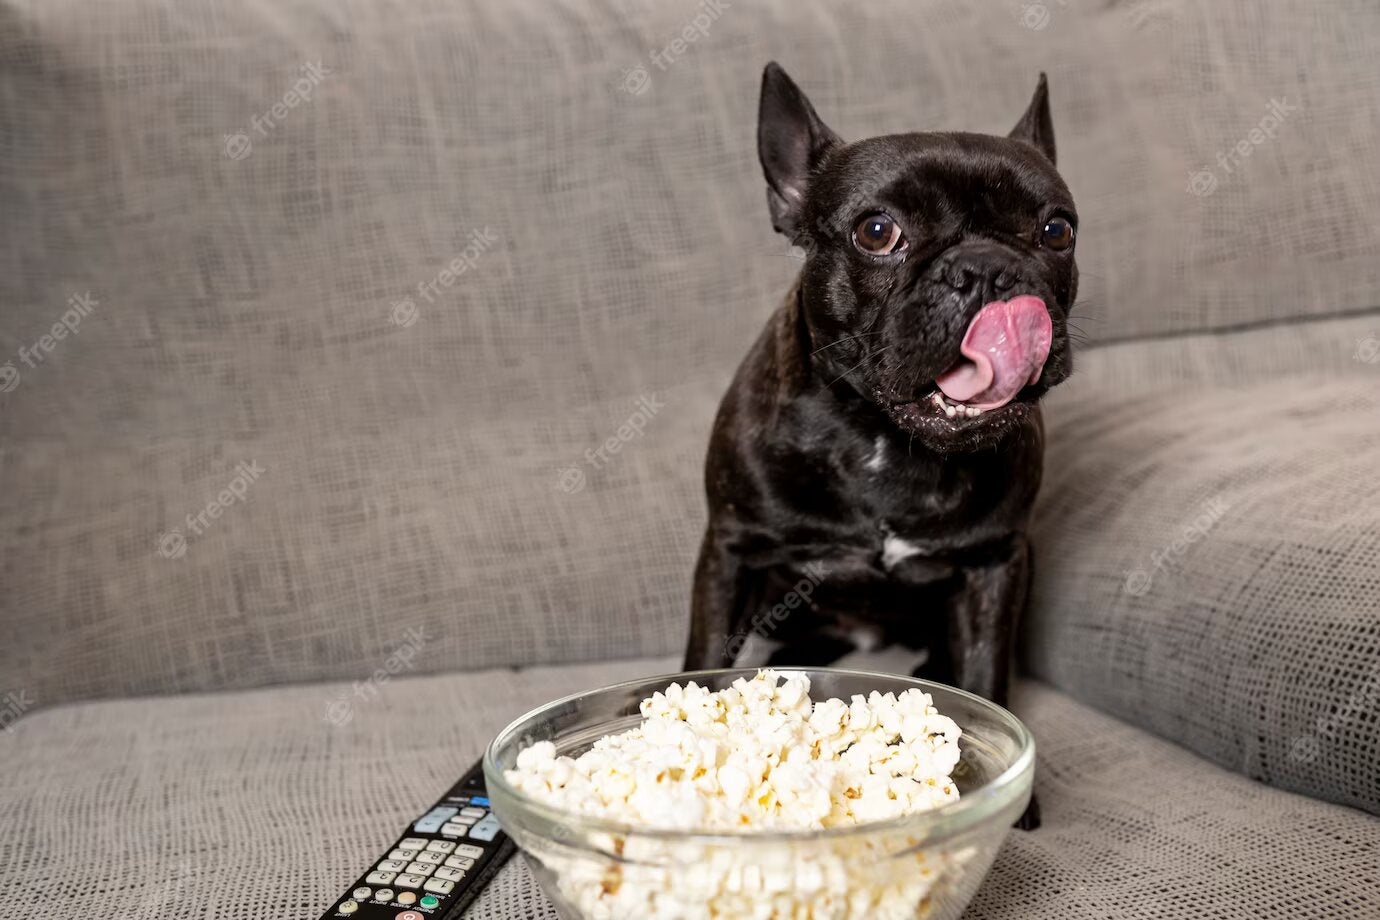 Can Dogs Safely Enjoy Popcorn? A Guide to Feeding Your Furry Friend